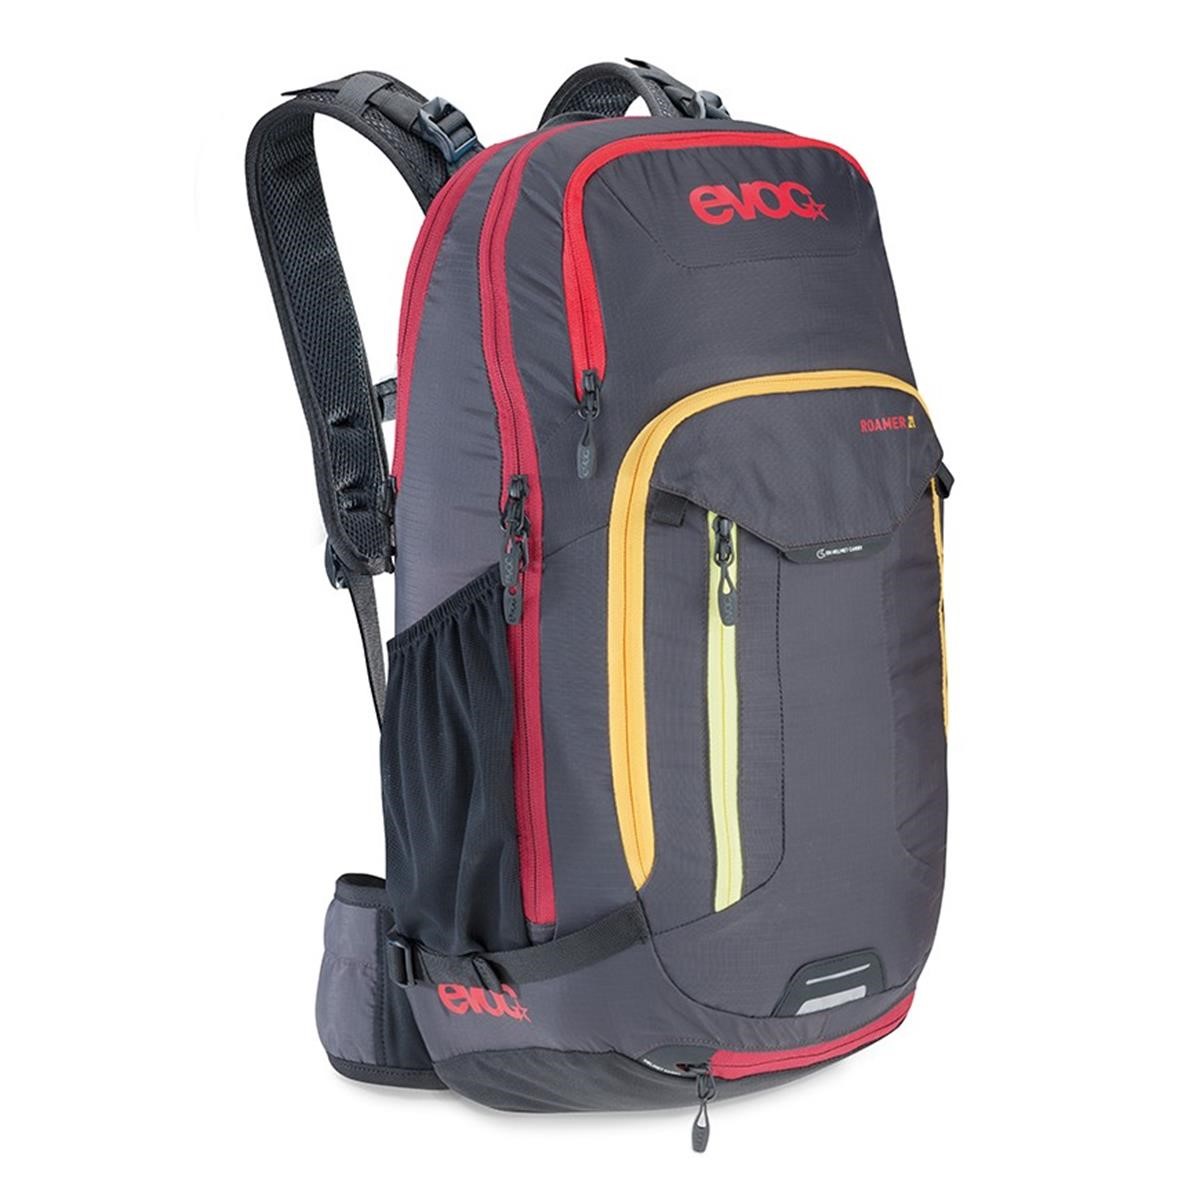 Evoc Backpack with Hydration System Compartment Roamer Mud, 22 Liter